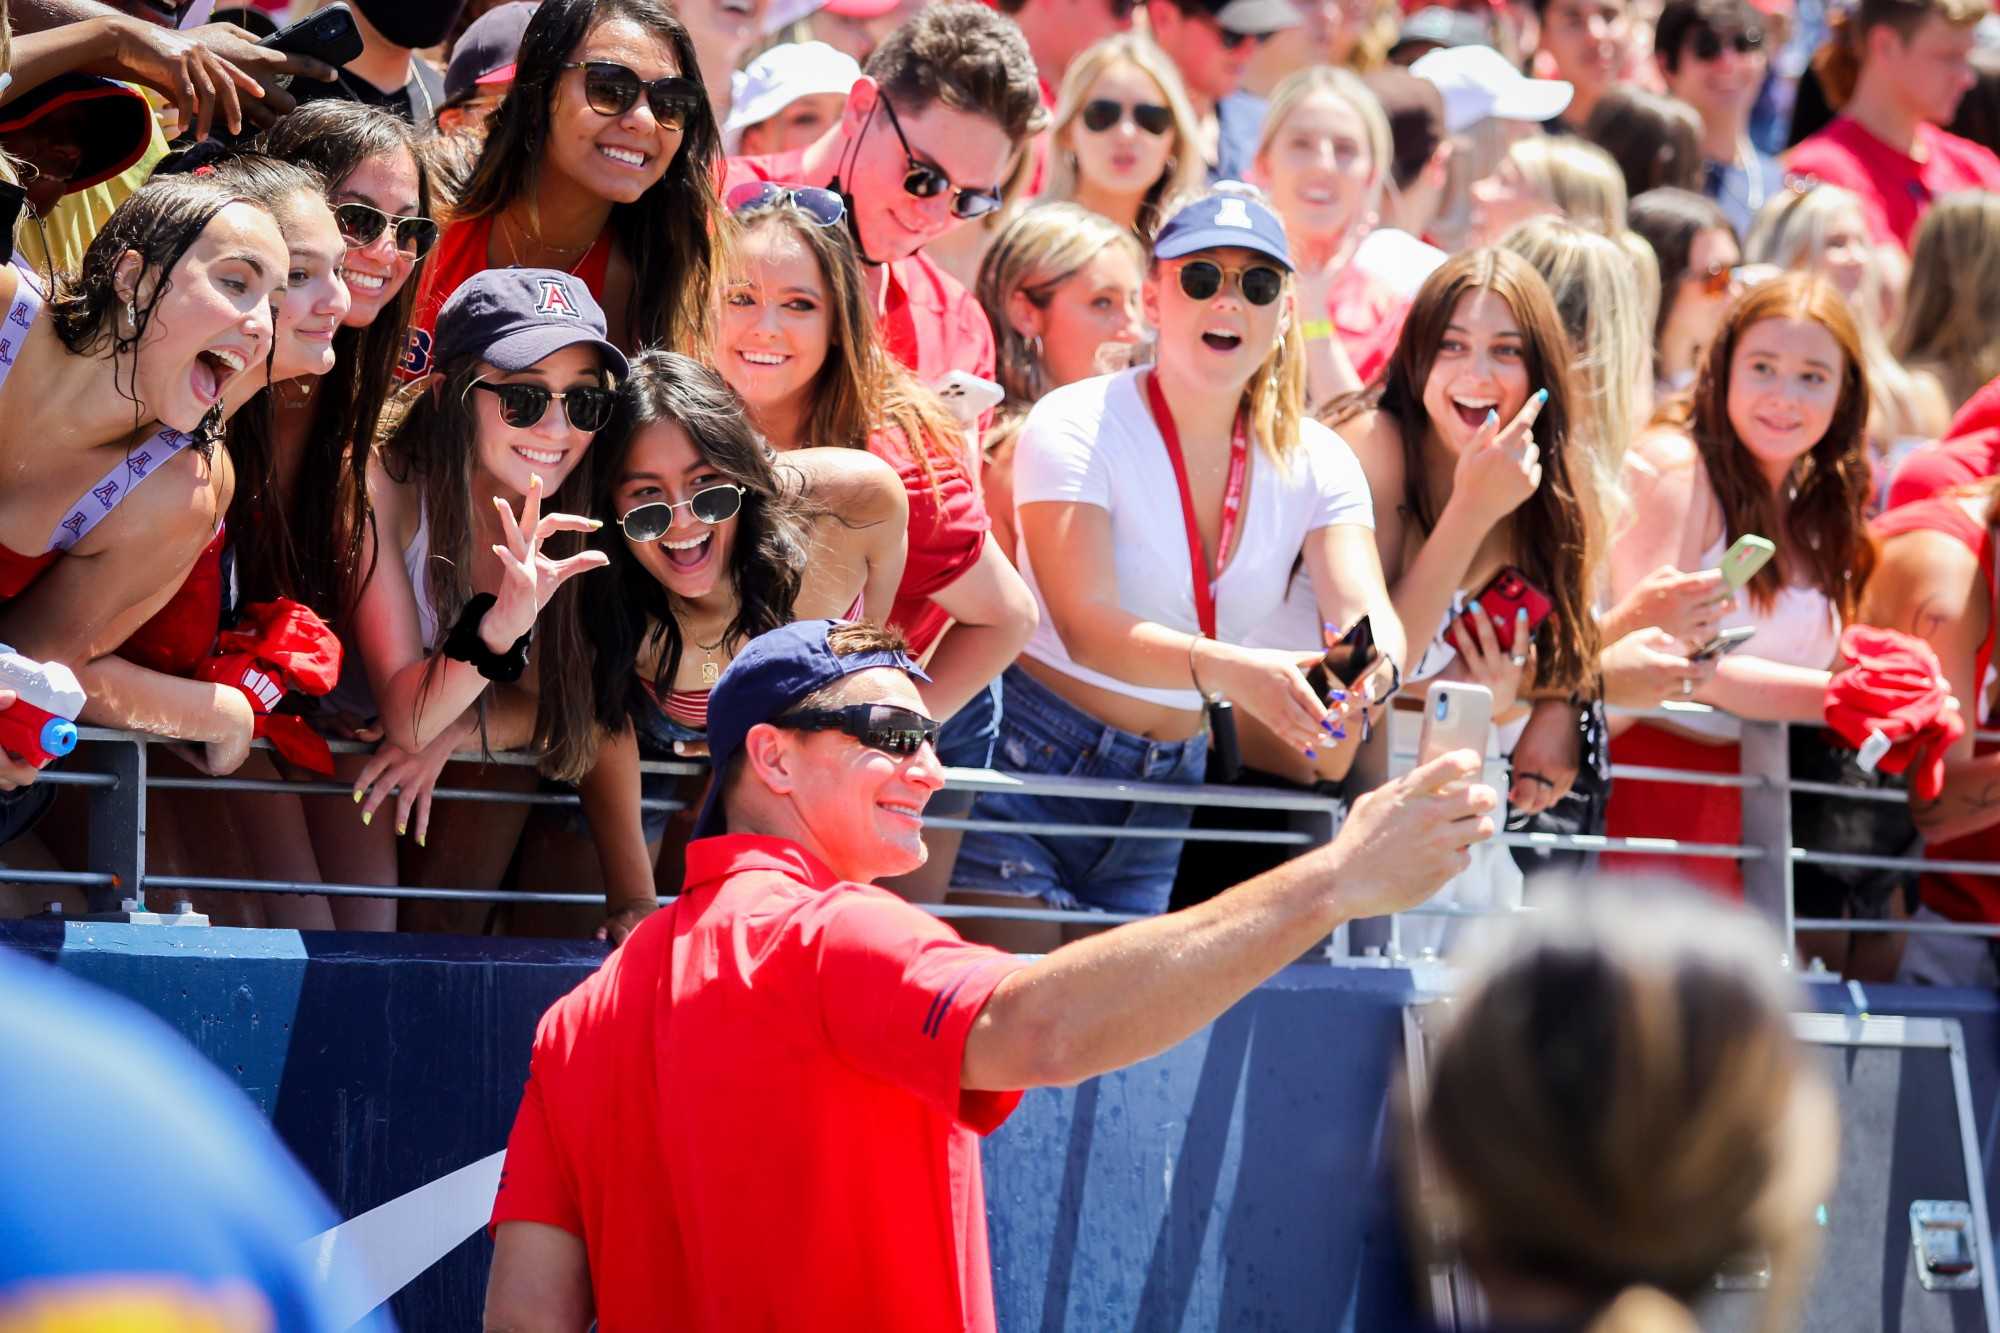 Gronkowski takes photos with fans at the Spring Game on Saturday, April 24 in Tucson, Ariz. Gronkowski’s team defeated Bruschi’s team 17-13.
